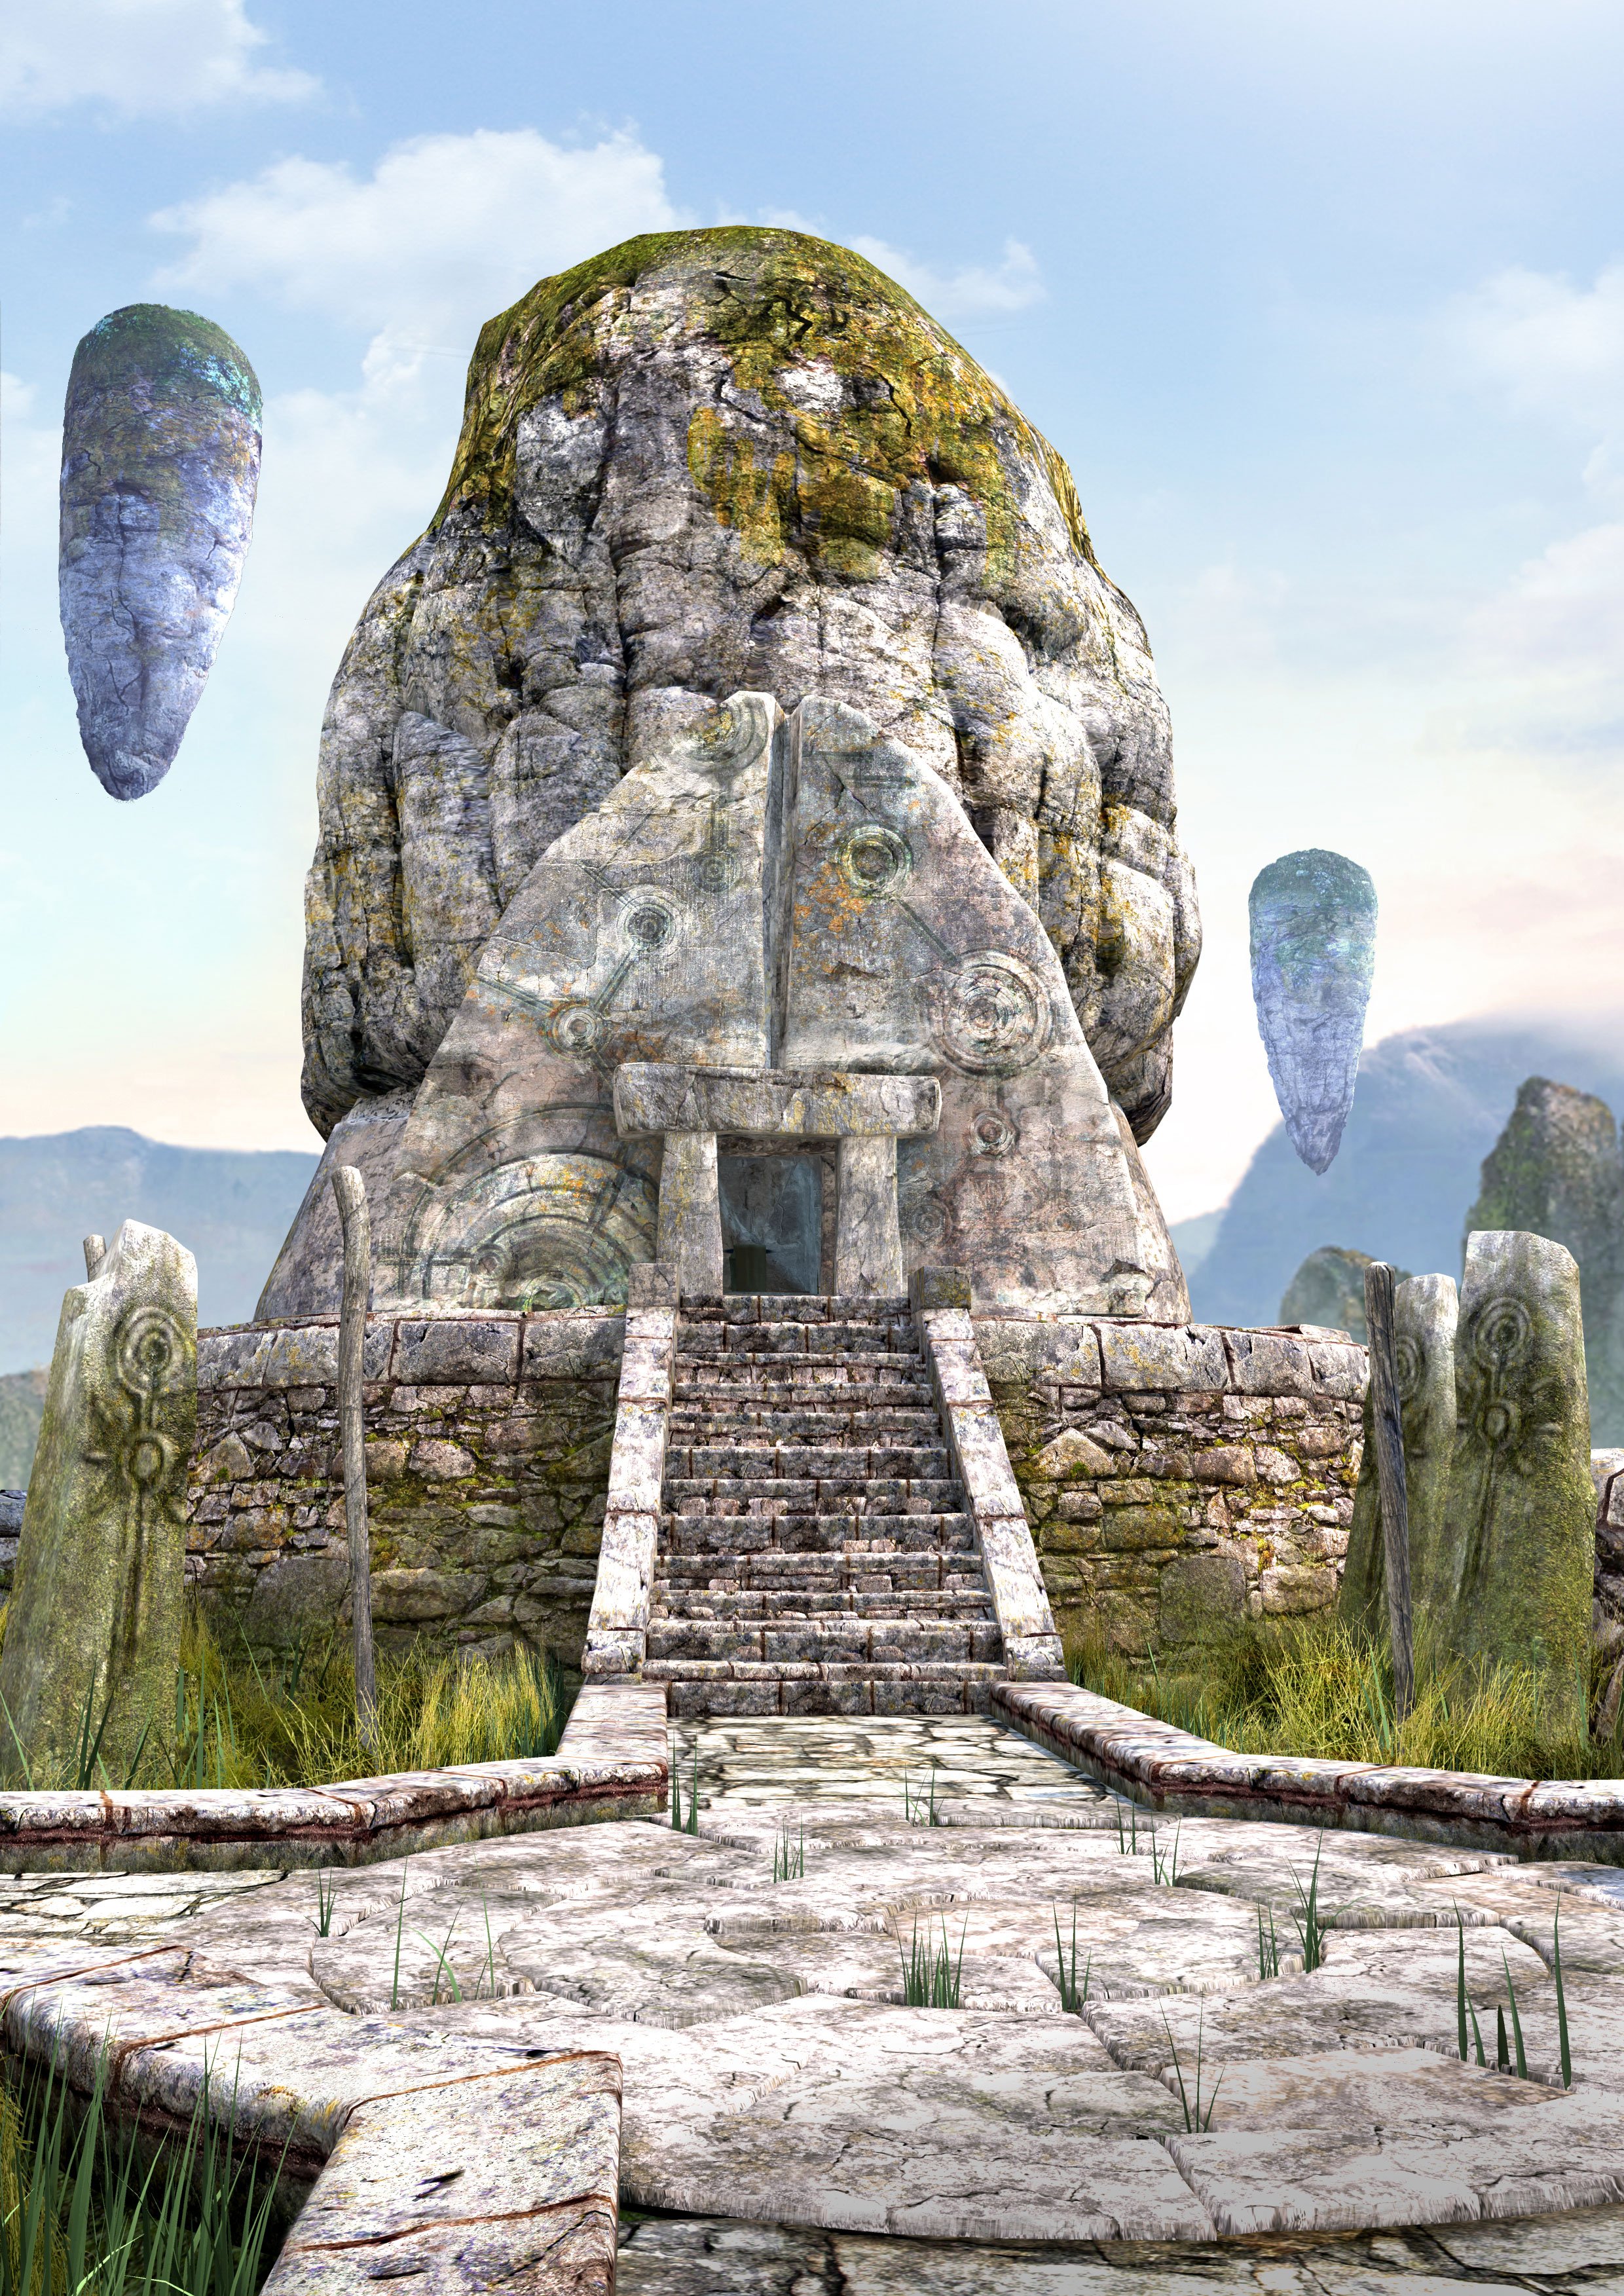 myst video game free download